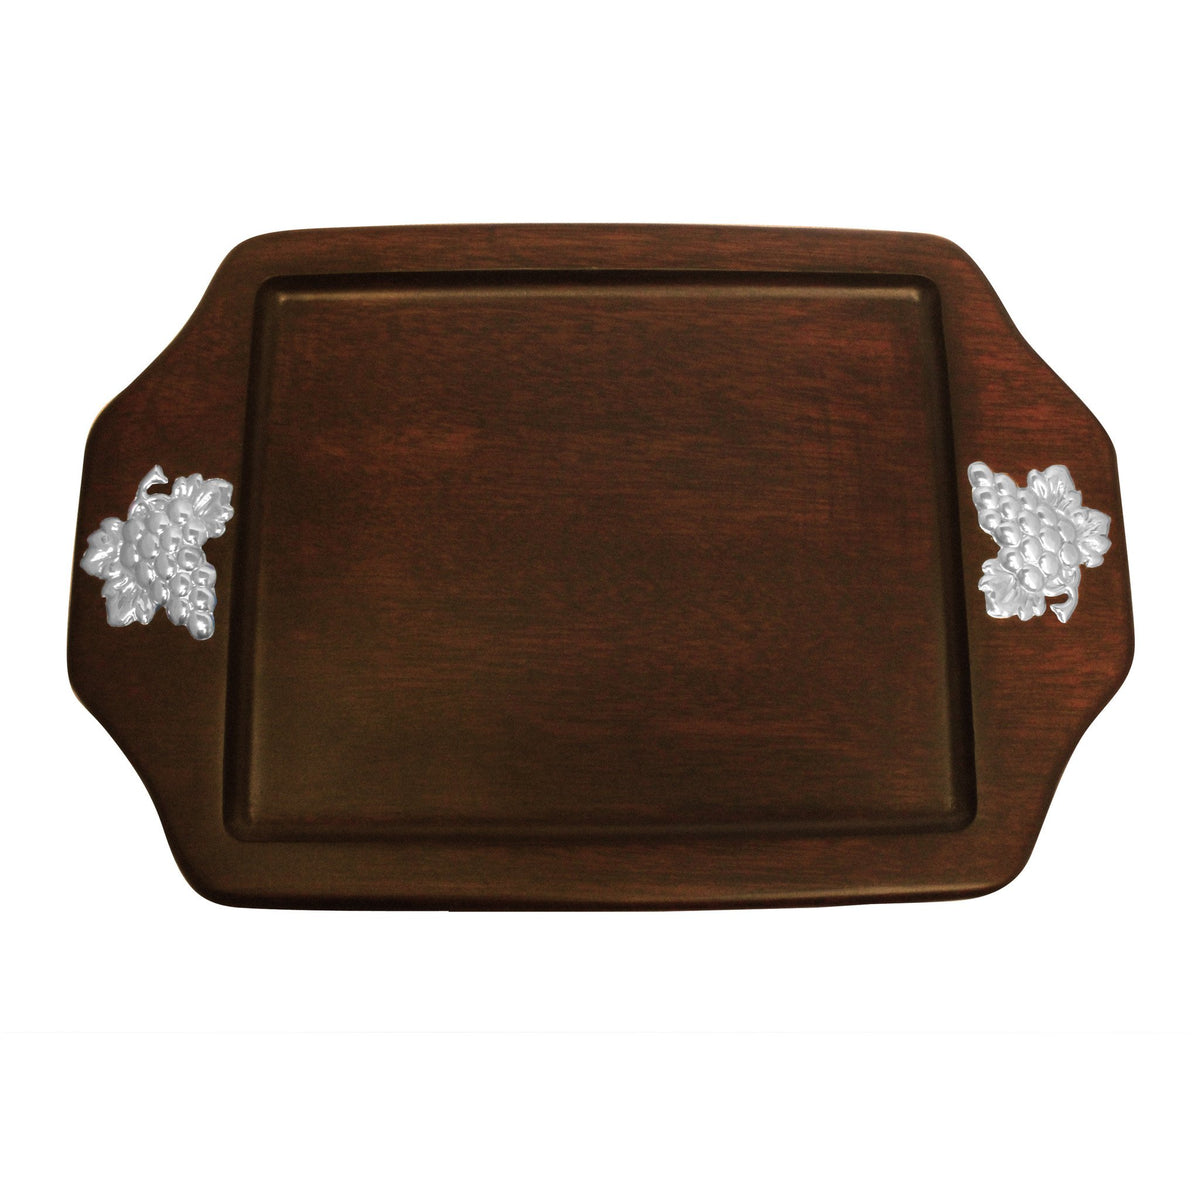 Serving Tray with Sterling Silver Grapes Accent - Qinti - The Peruvian Shop